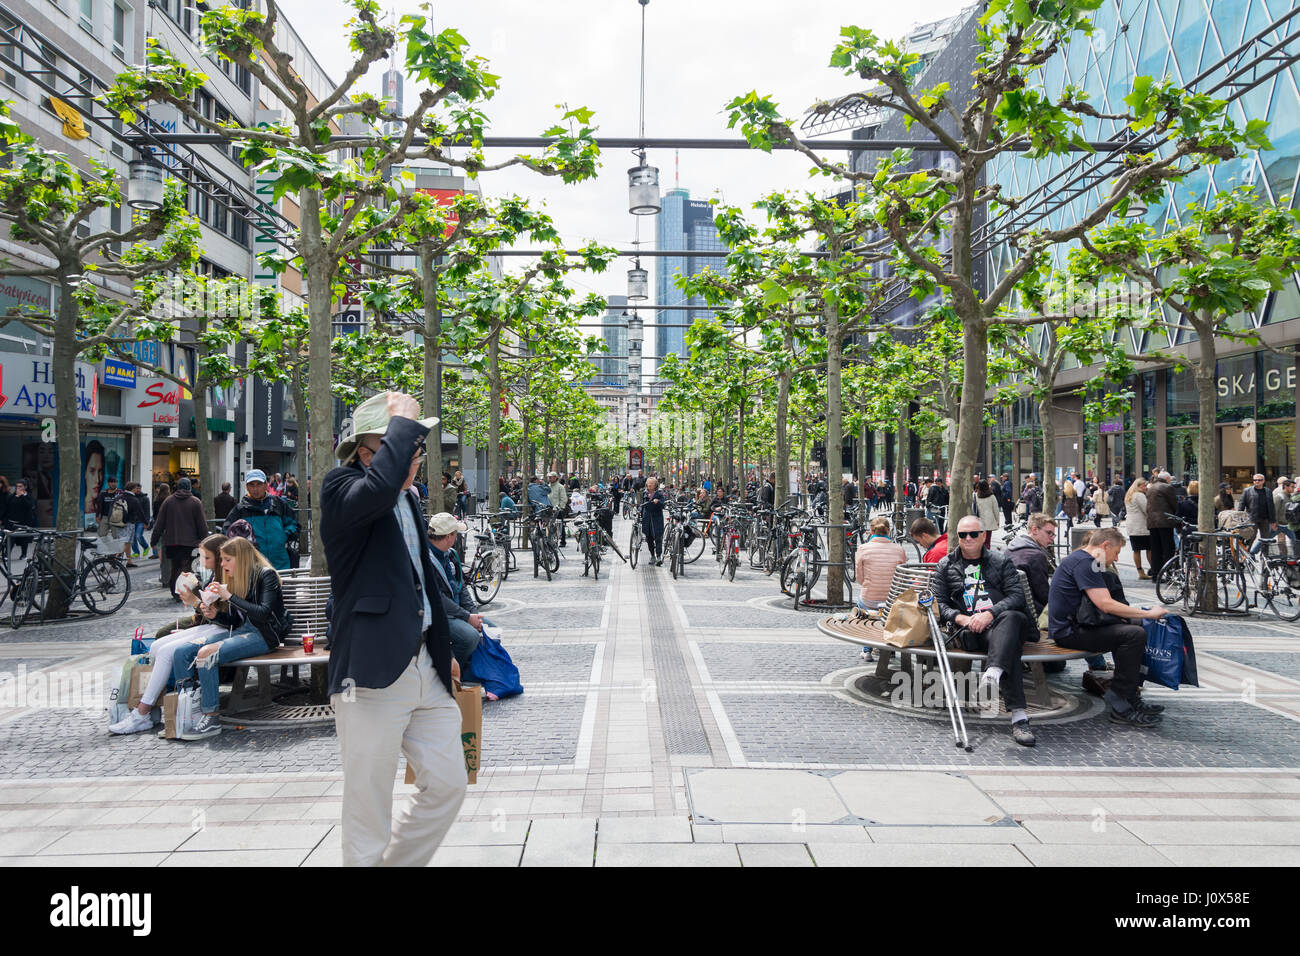 FRANKFURT AM MAIN, GERMANY - MAY 18, 2016: people walk along the Zeil in midday in Frankfurt, Germany. Since the 19th century it is of the most famous Stock Photo